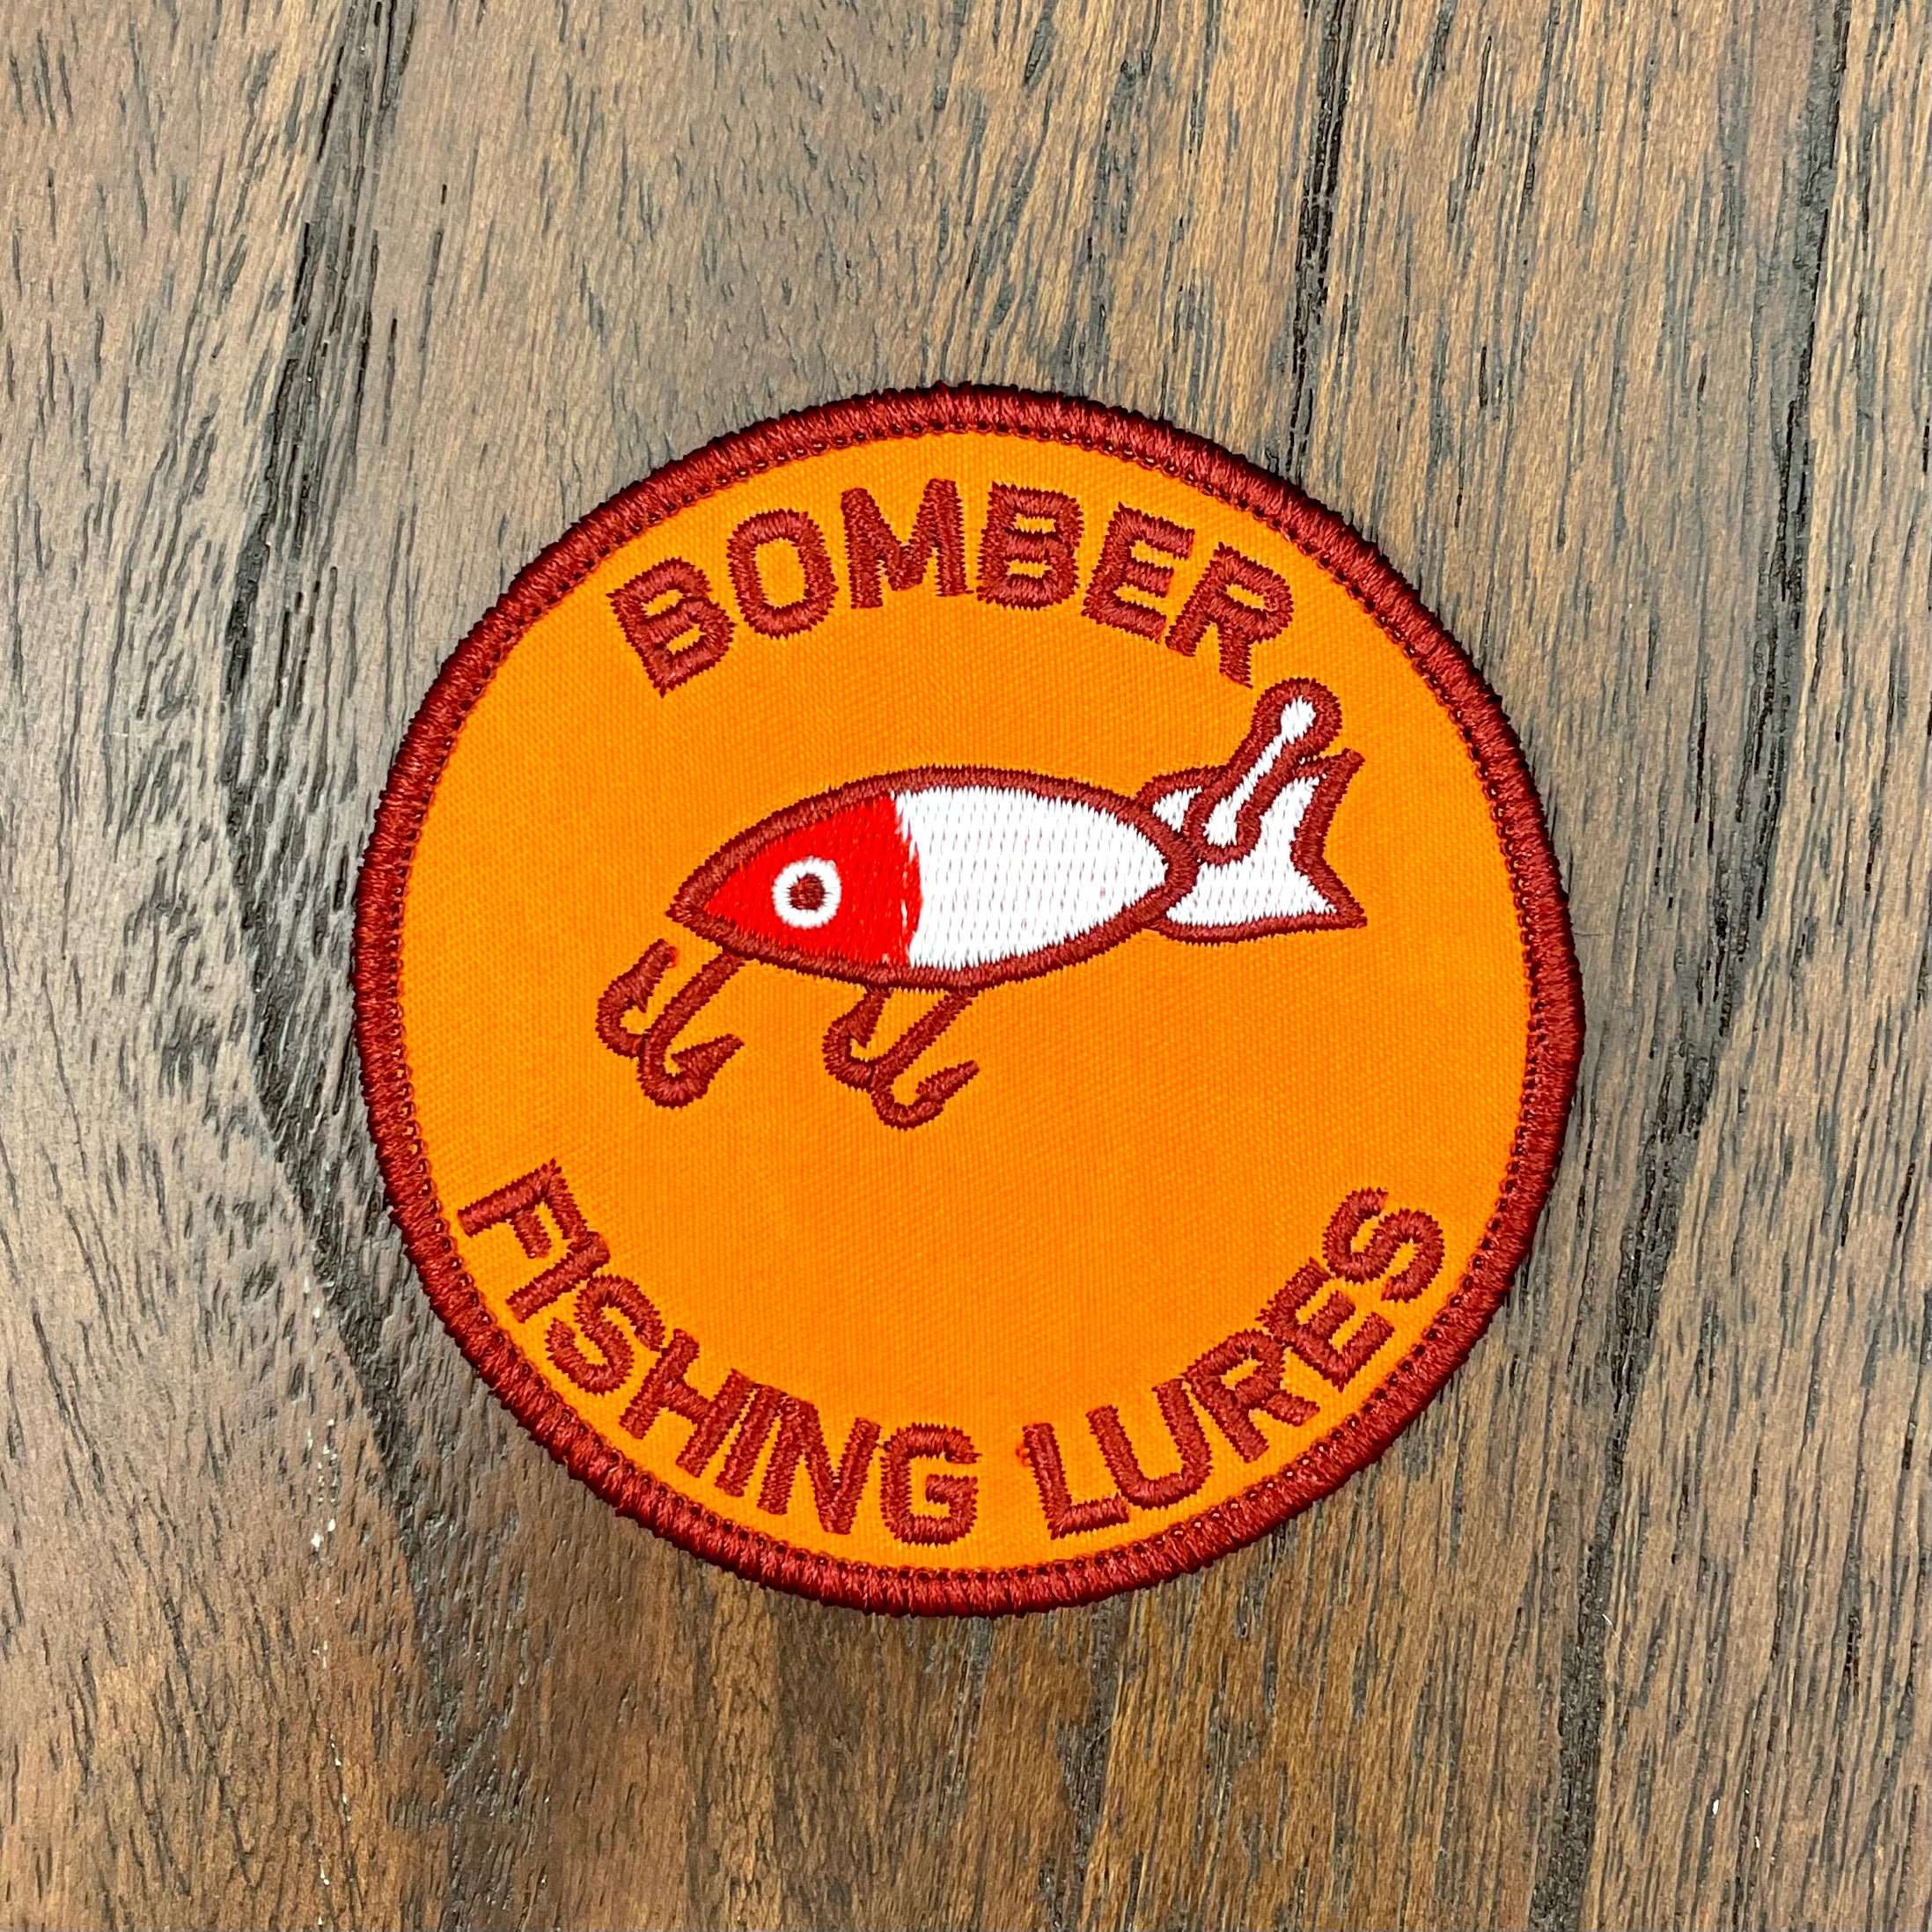 Bomber Fishing Lures Patch, Hat Patch